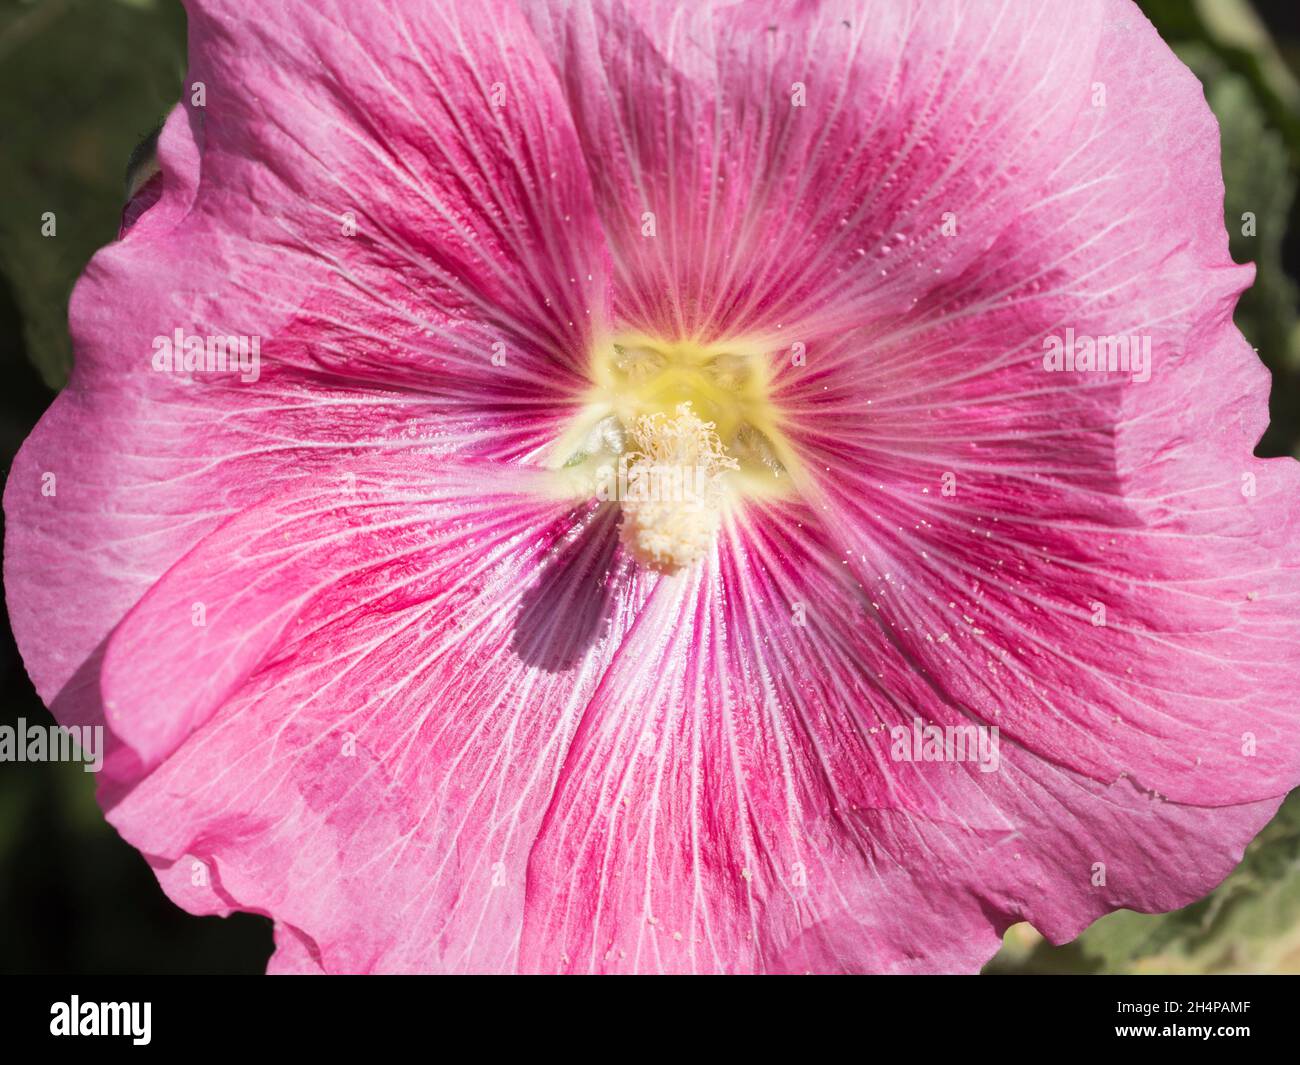 Close Up View Of A Stigma Of A Flower Stock Photo Image Of, 47% OFF